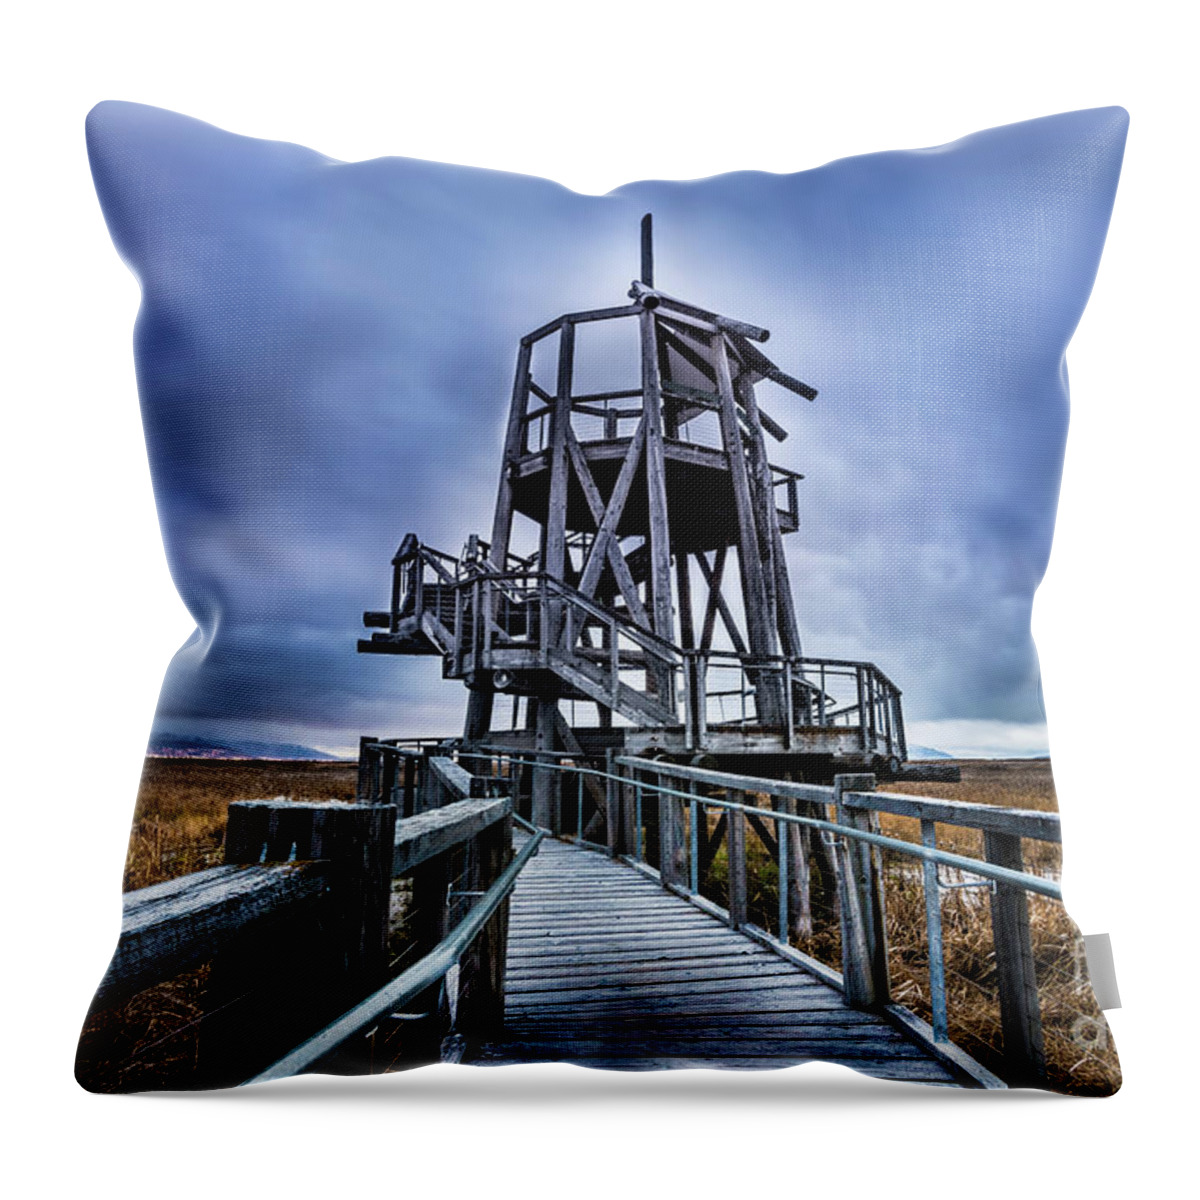 Utah Throw Pillow featuring the photograph Observation Tower - Great Salt Lake Shorelands Preserve by Gary Whitton